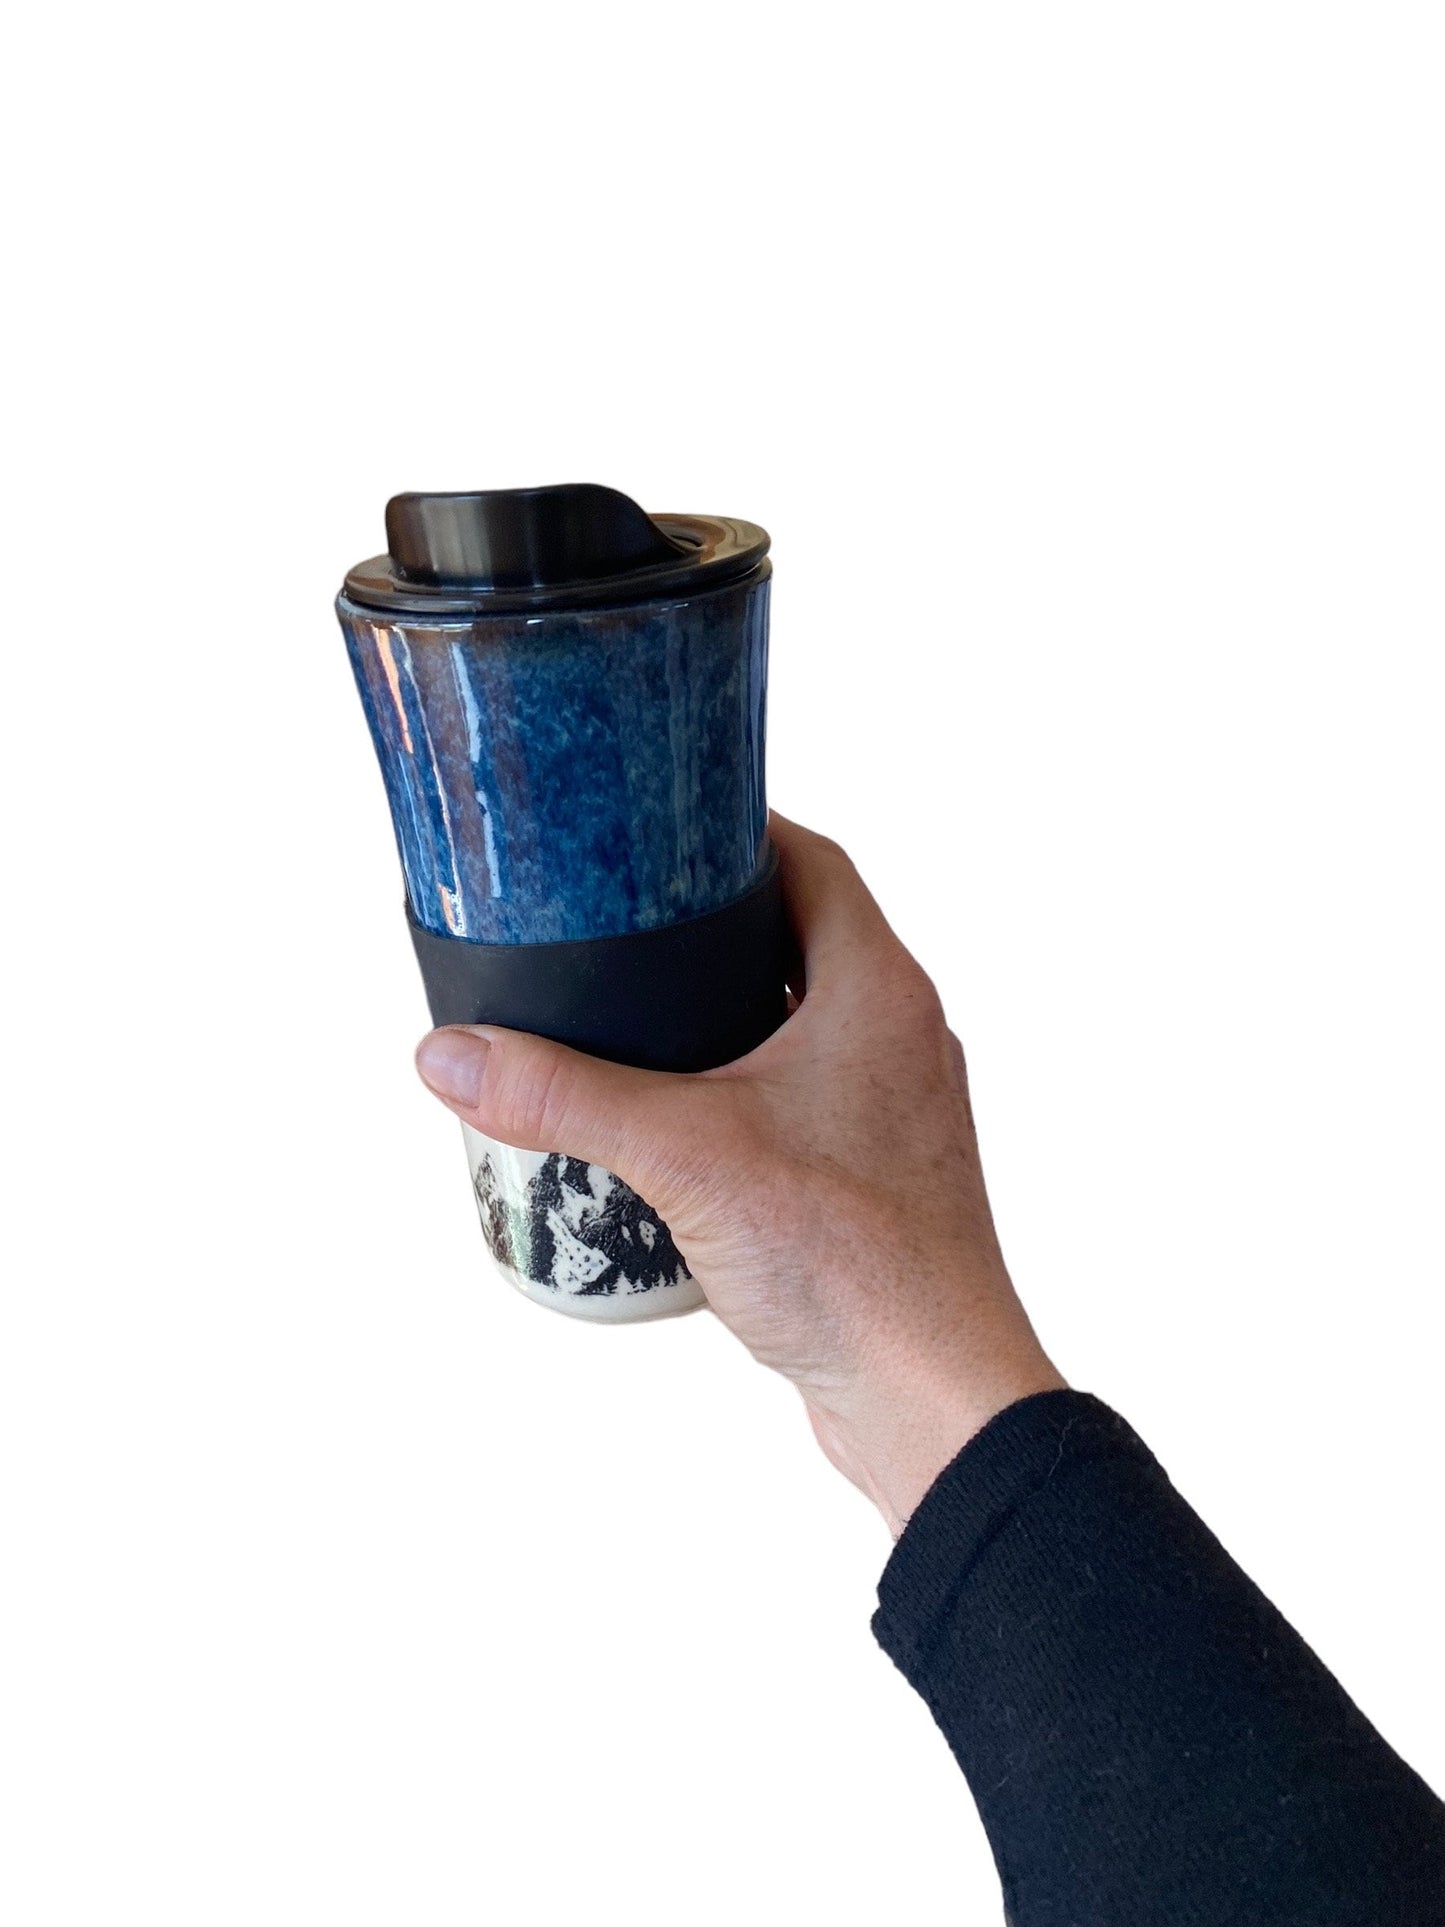 Large Travel Mug with Locking Lid Embellished with Mountains - Stylish and Secure Pottery for Nature-Loving Adventures